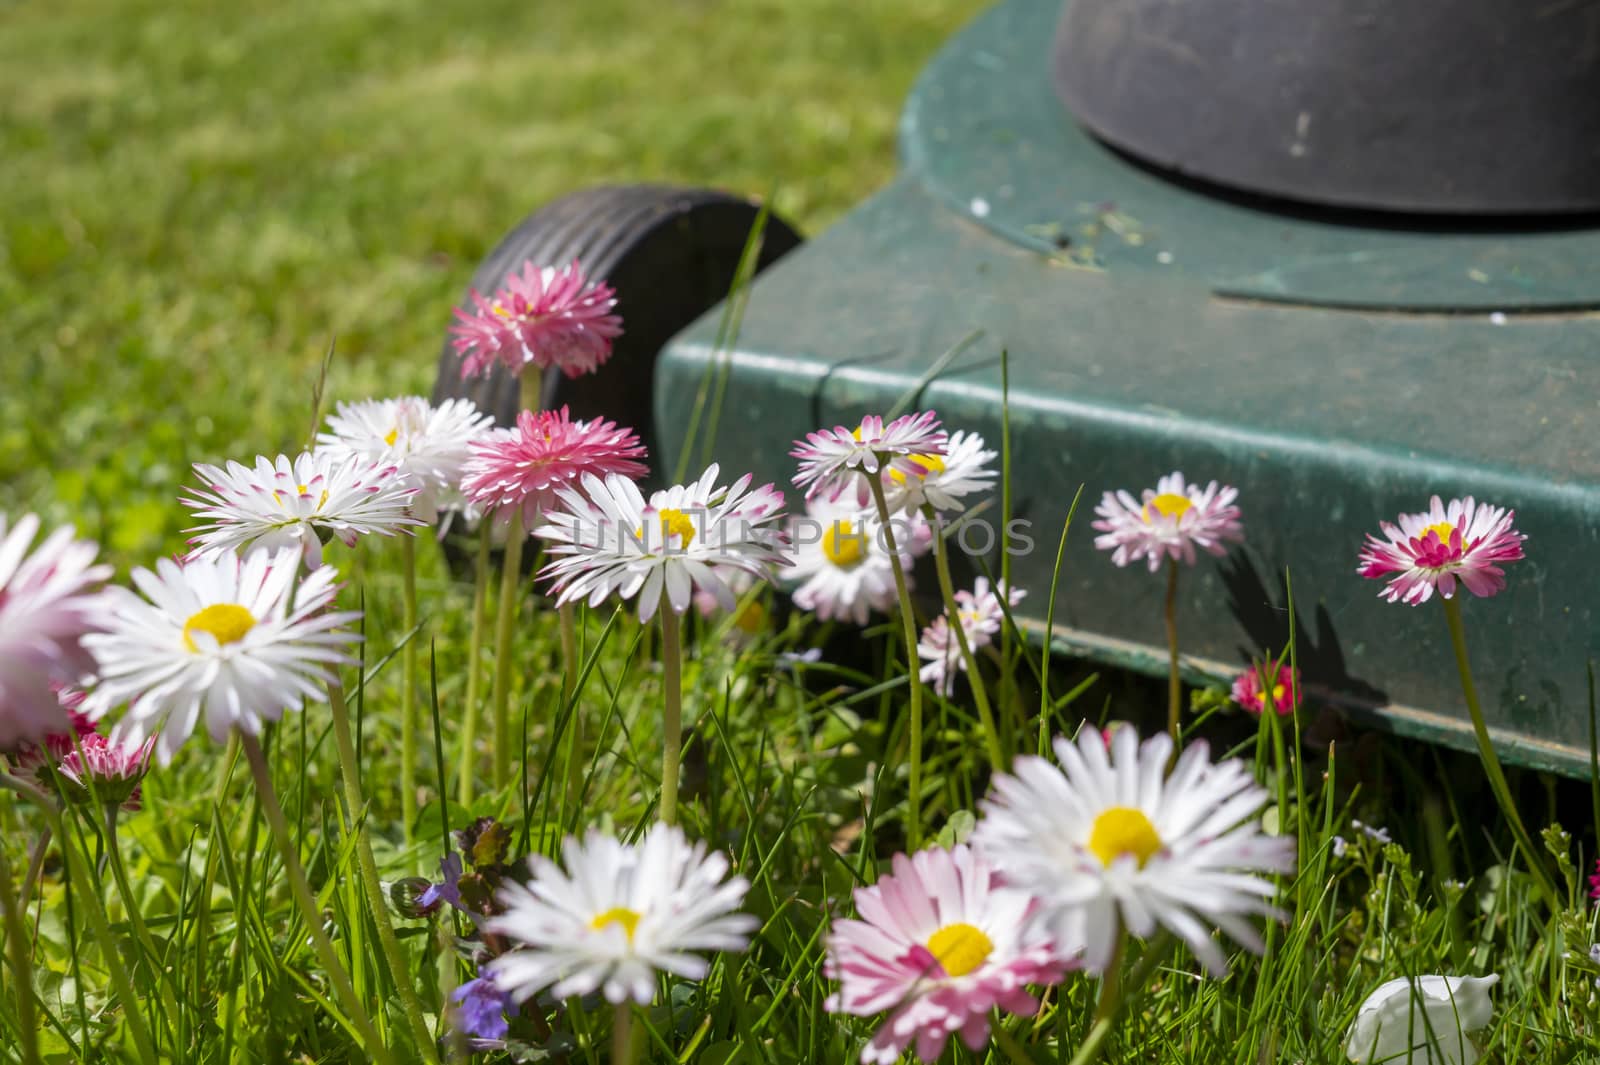 Dainty white and pink spring flowers in a green garden lawn with electric lawn mower at the end of the cluster in a low angle ground level view in a seasons and yard maintenance concept